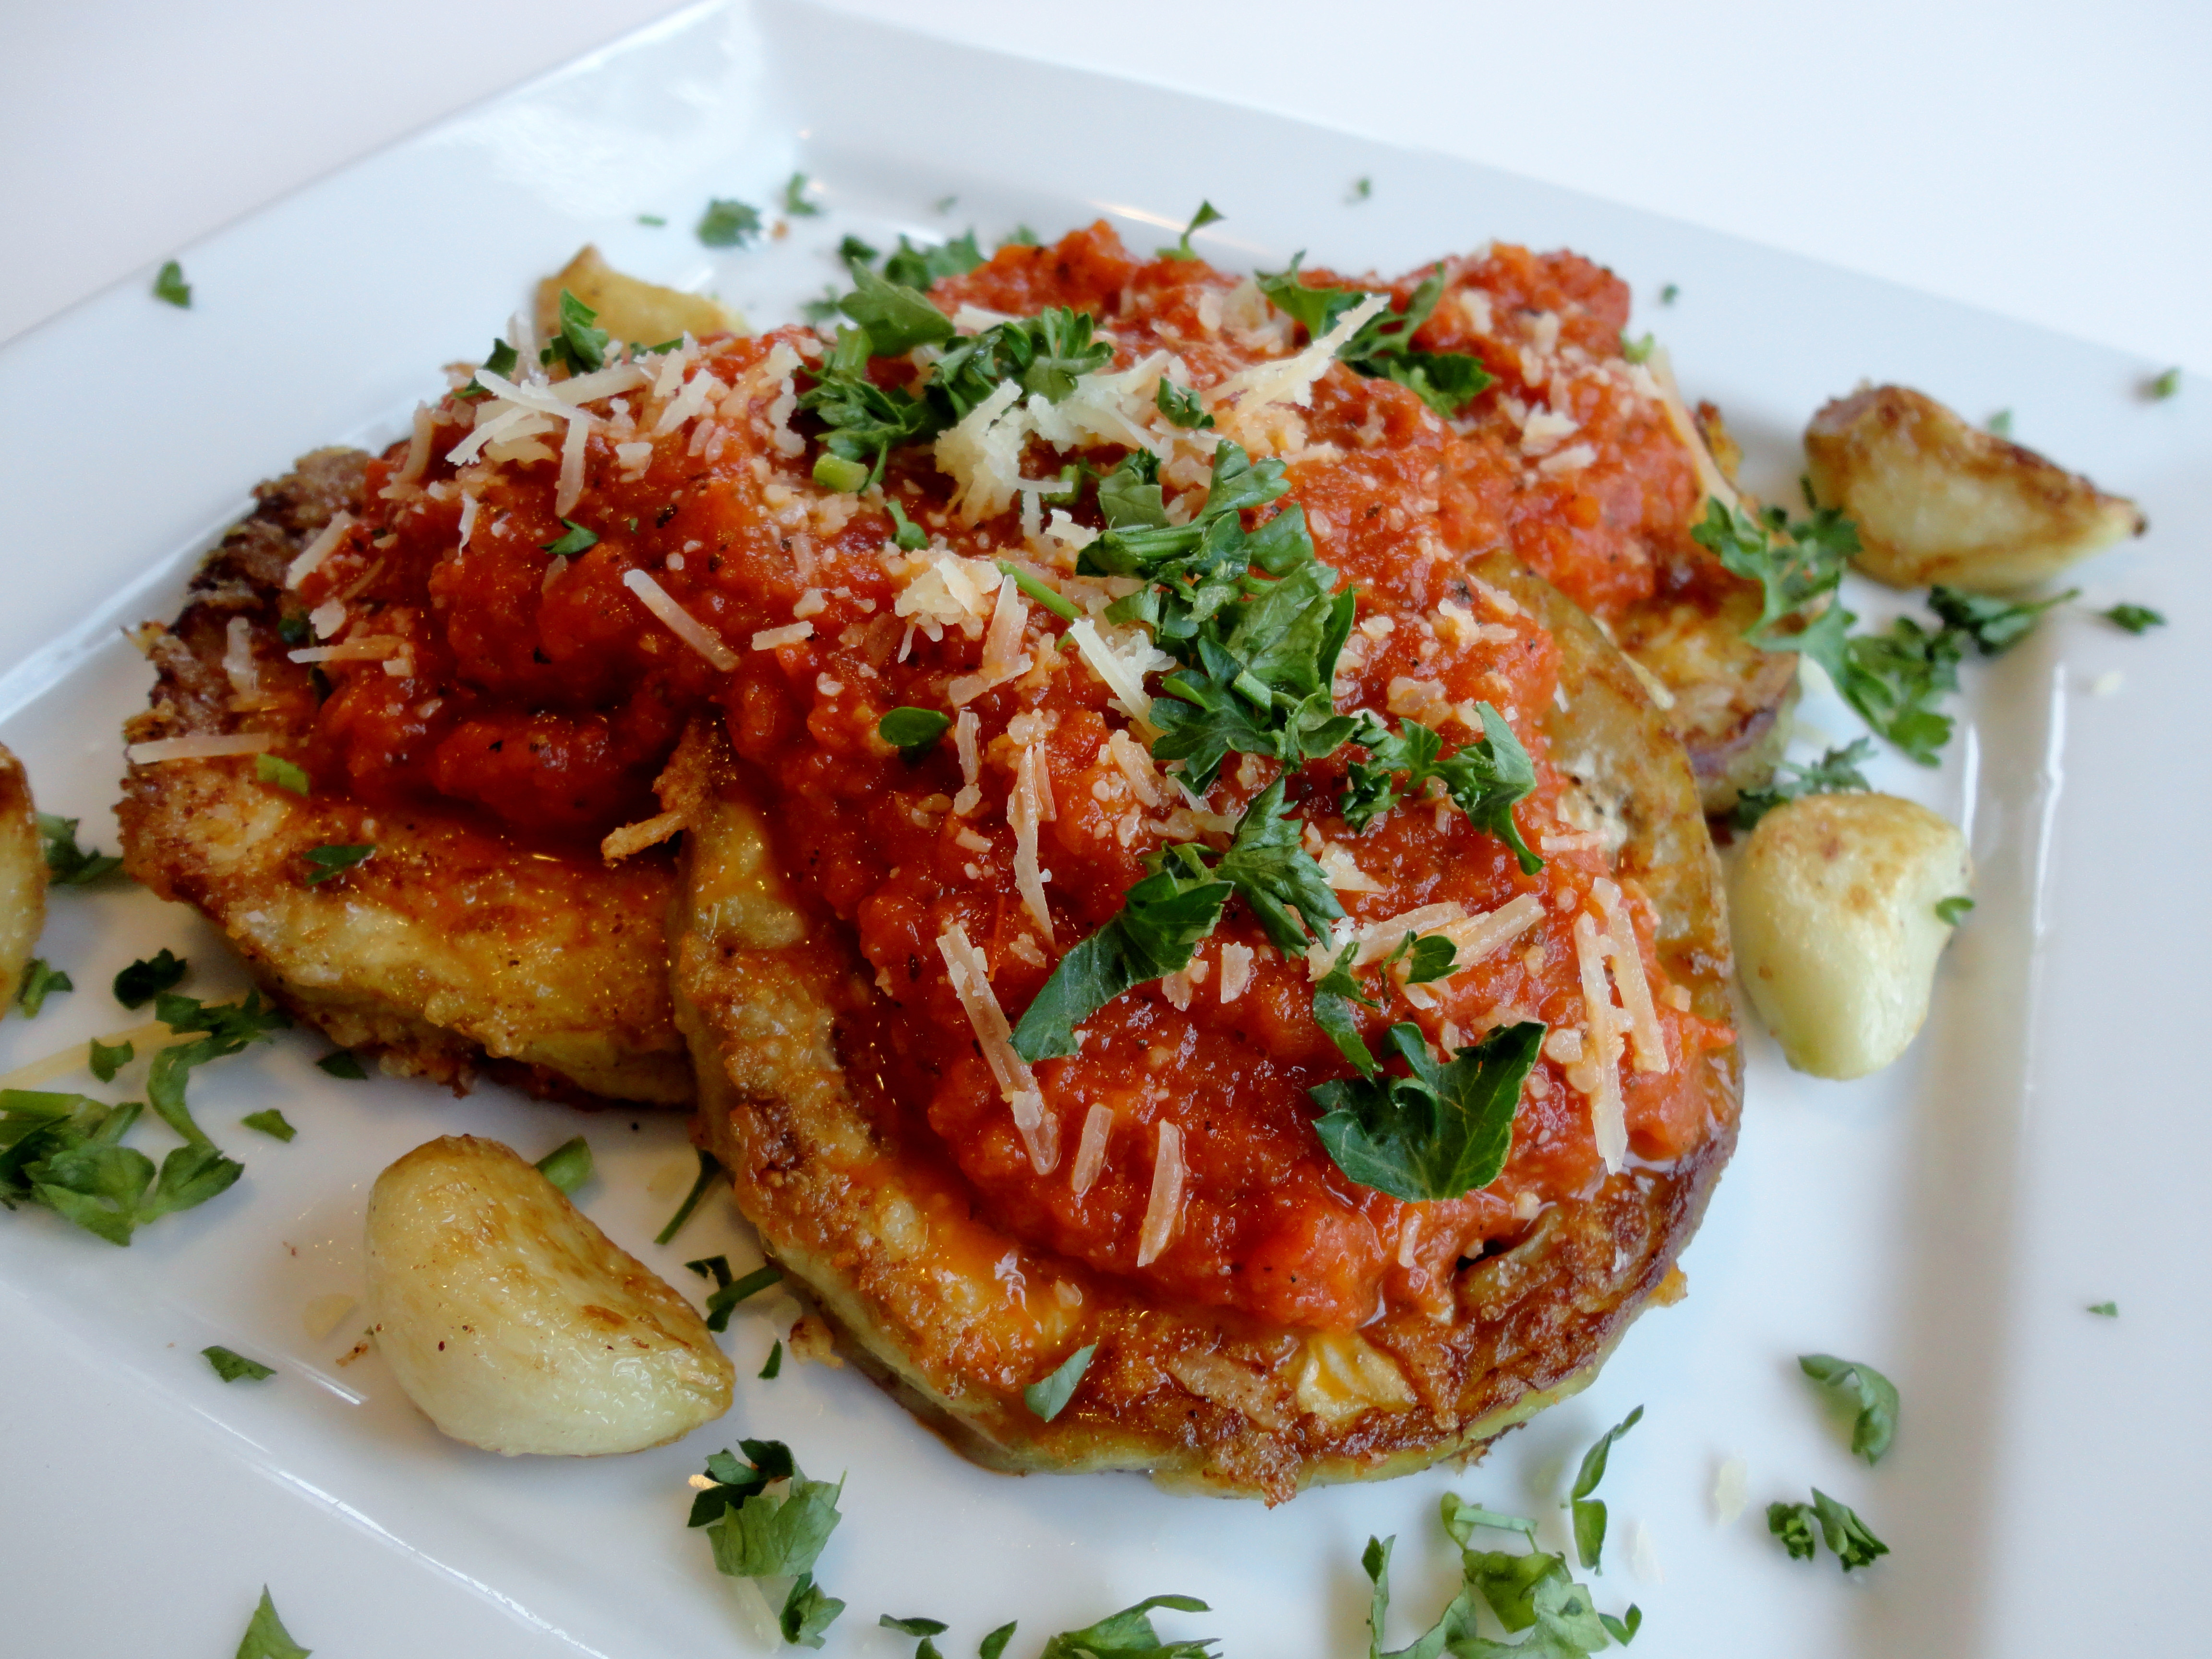 Low Carb Eggplant Parmesan
 Low Carb Eggplant Parmesan with Fire Roasted Tomato Sauce